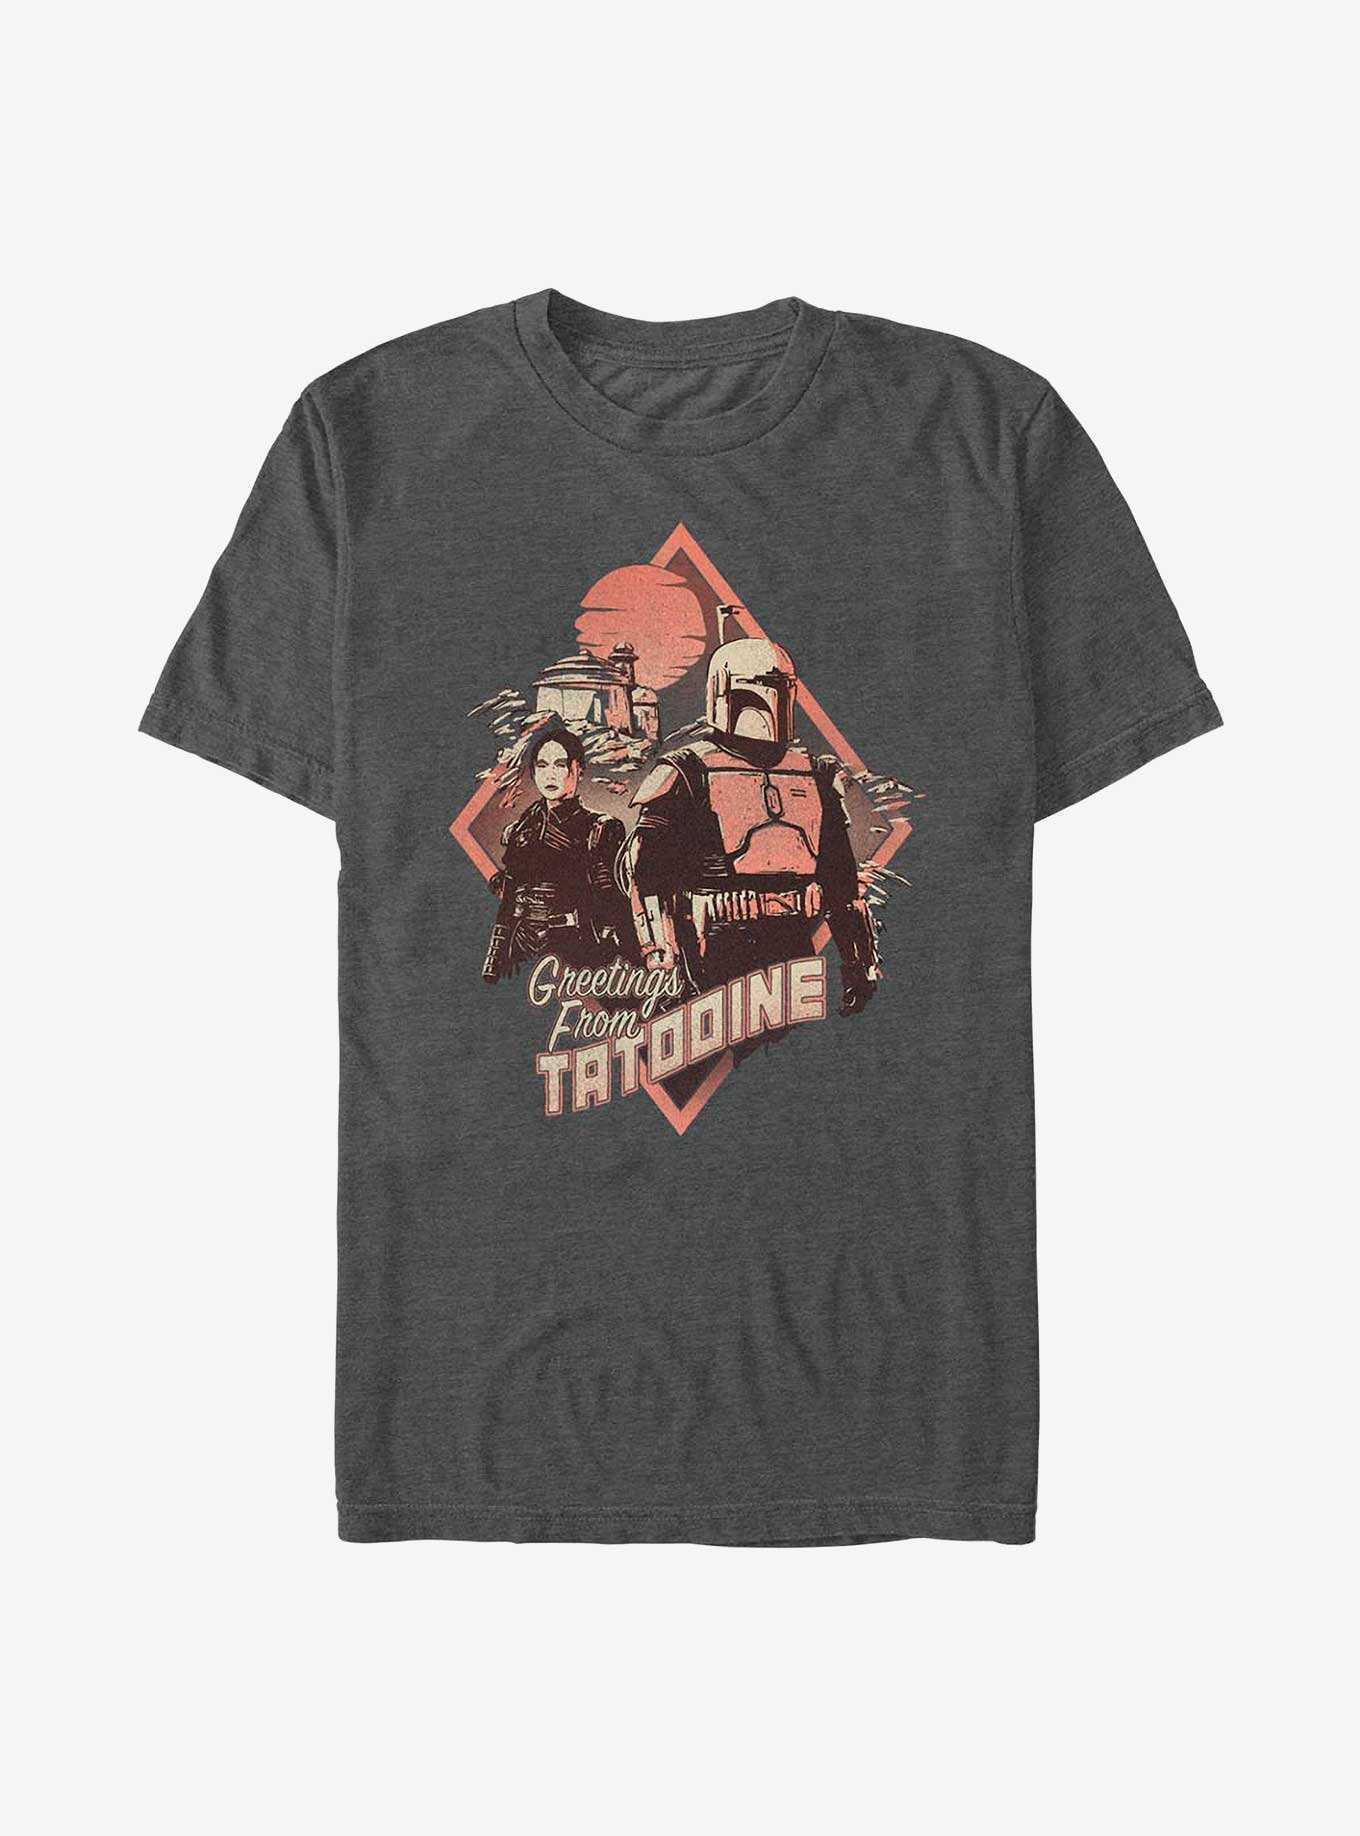 Star Wars The Book Of Boba Fett Greeting From Tatooine T-Shirt, , hi-res